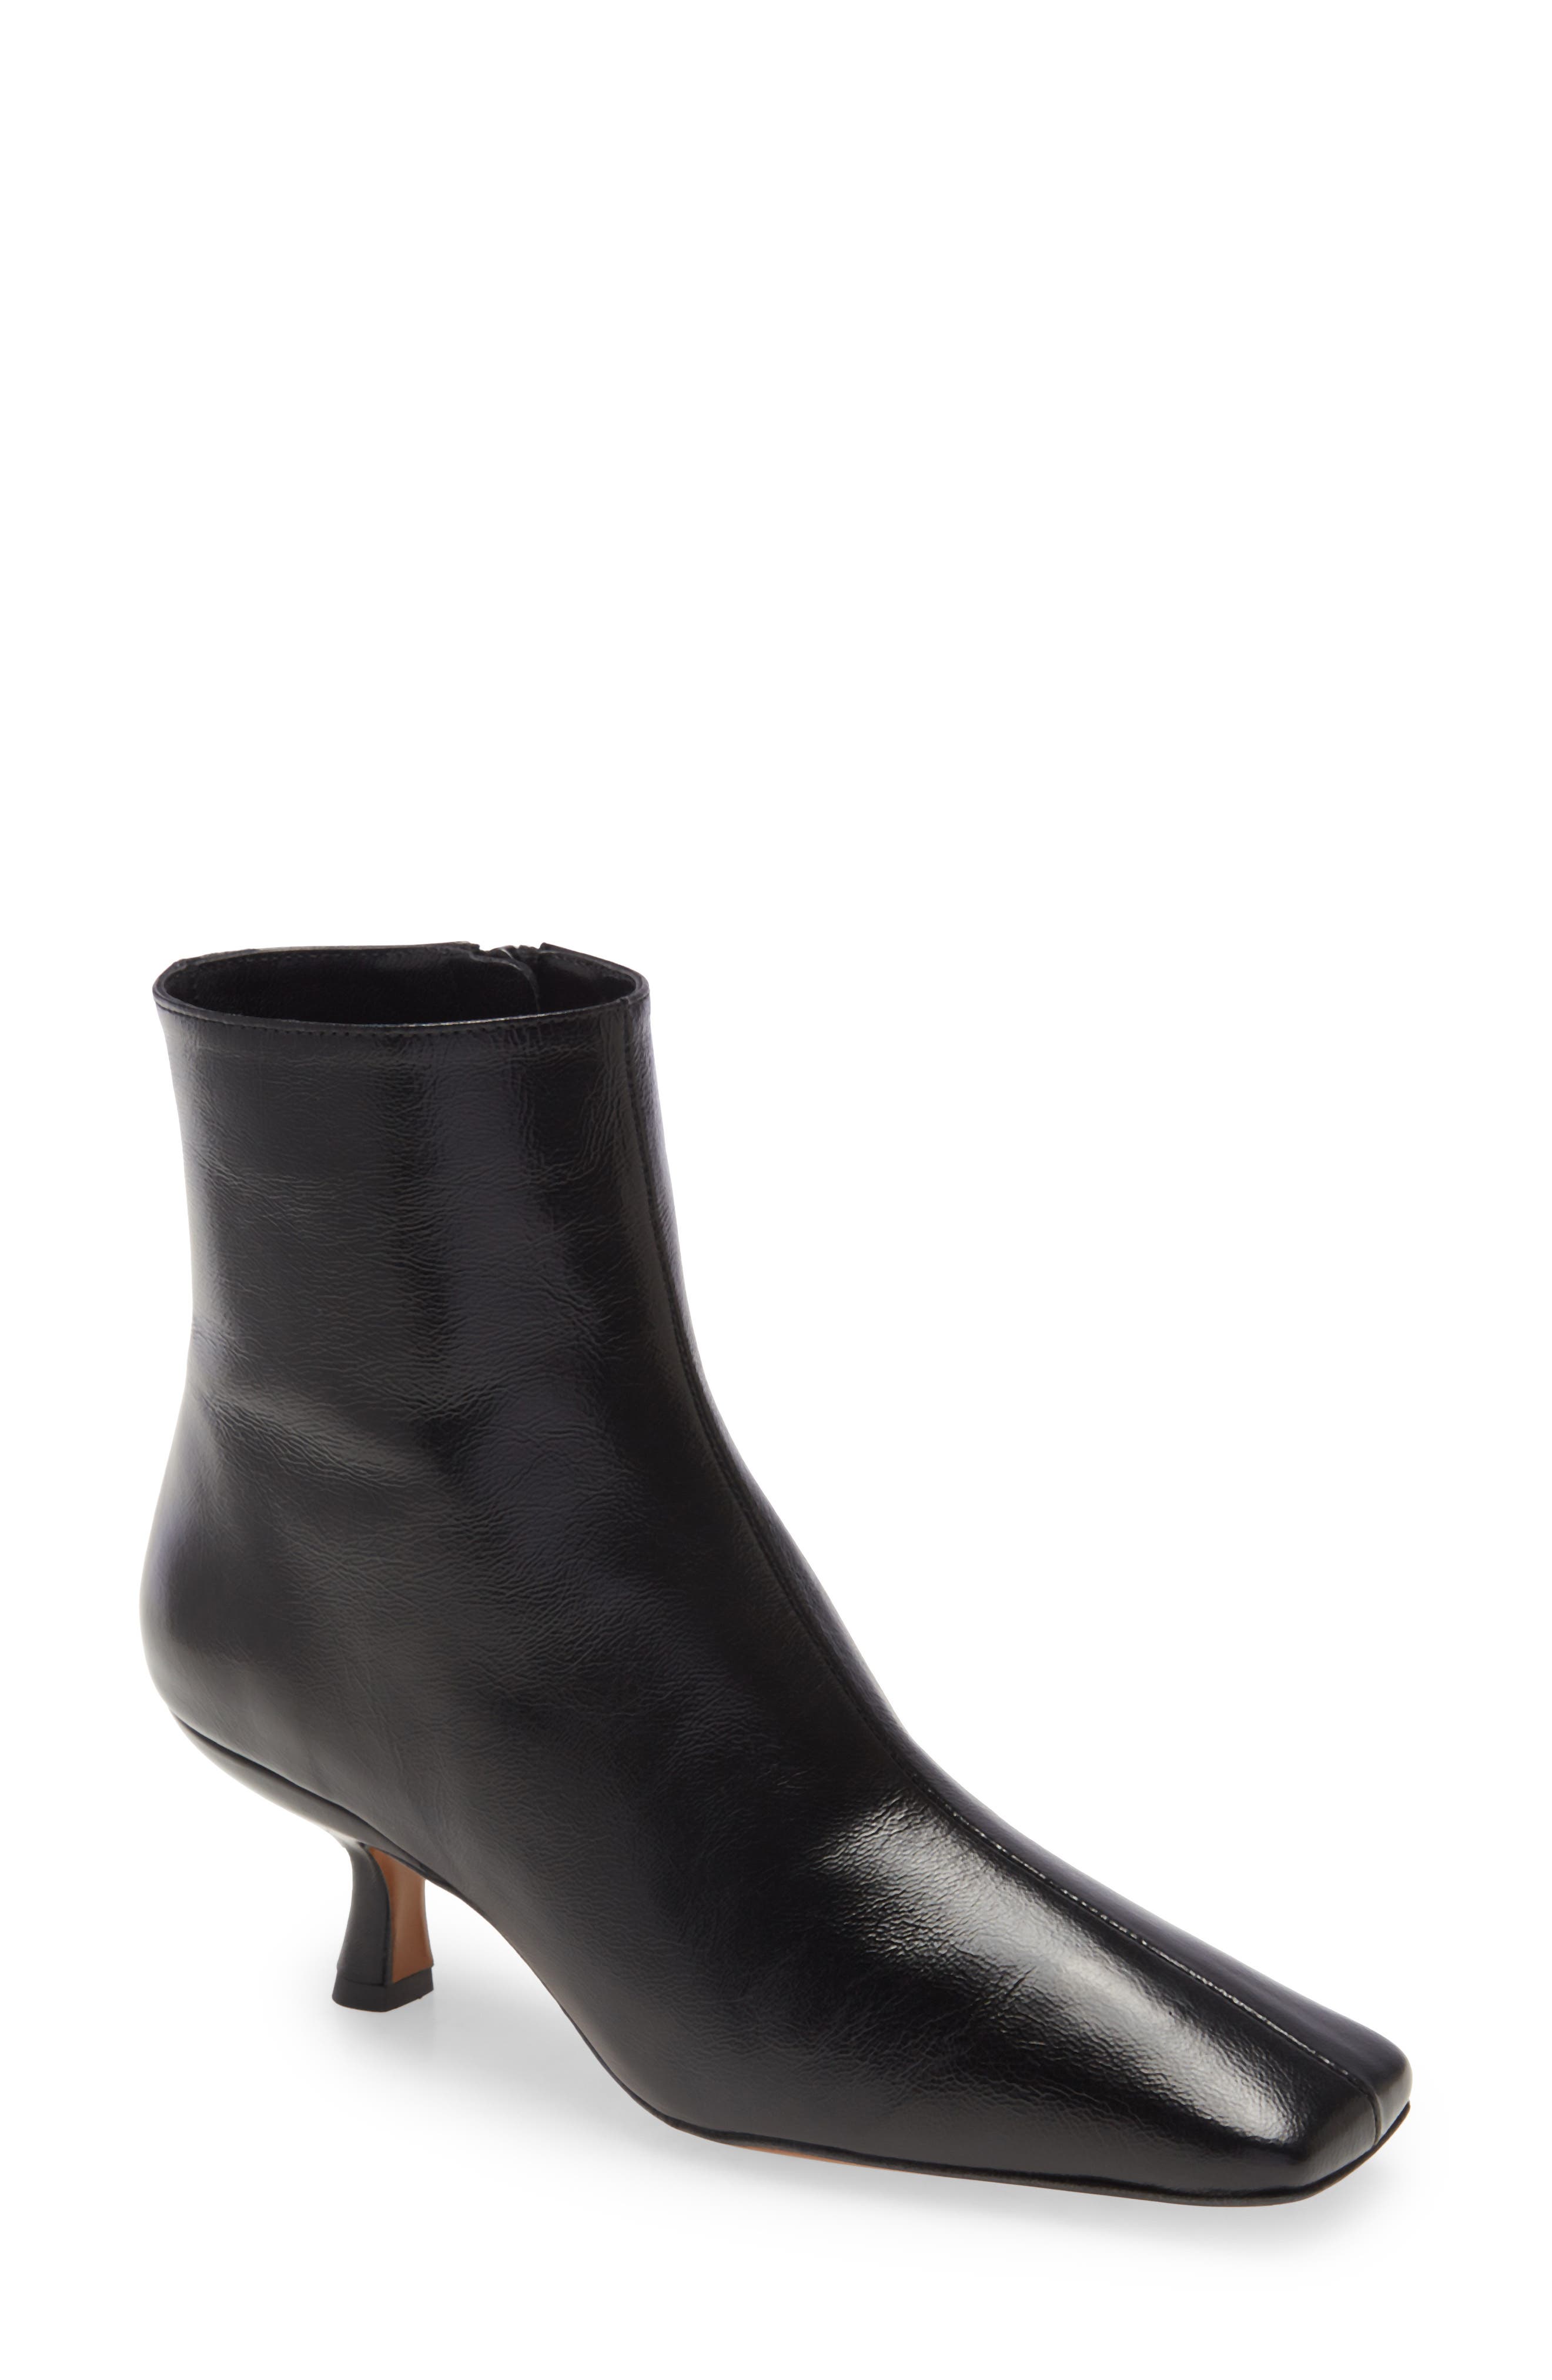 low heel square toe boots